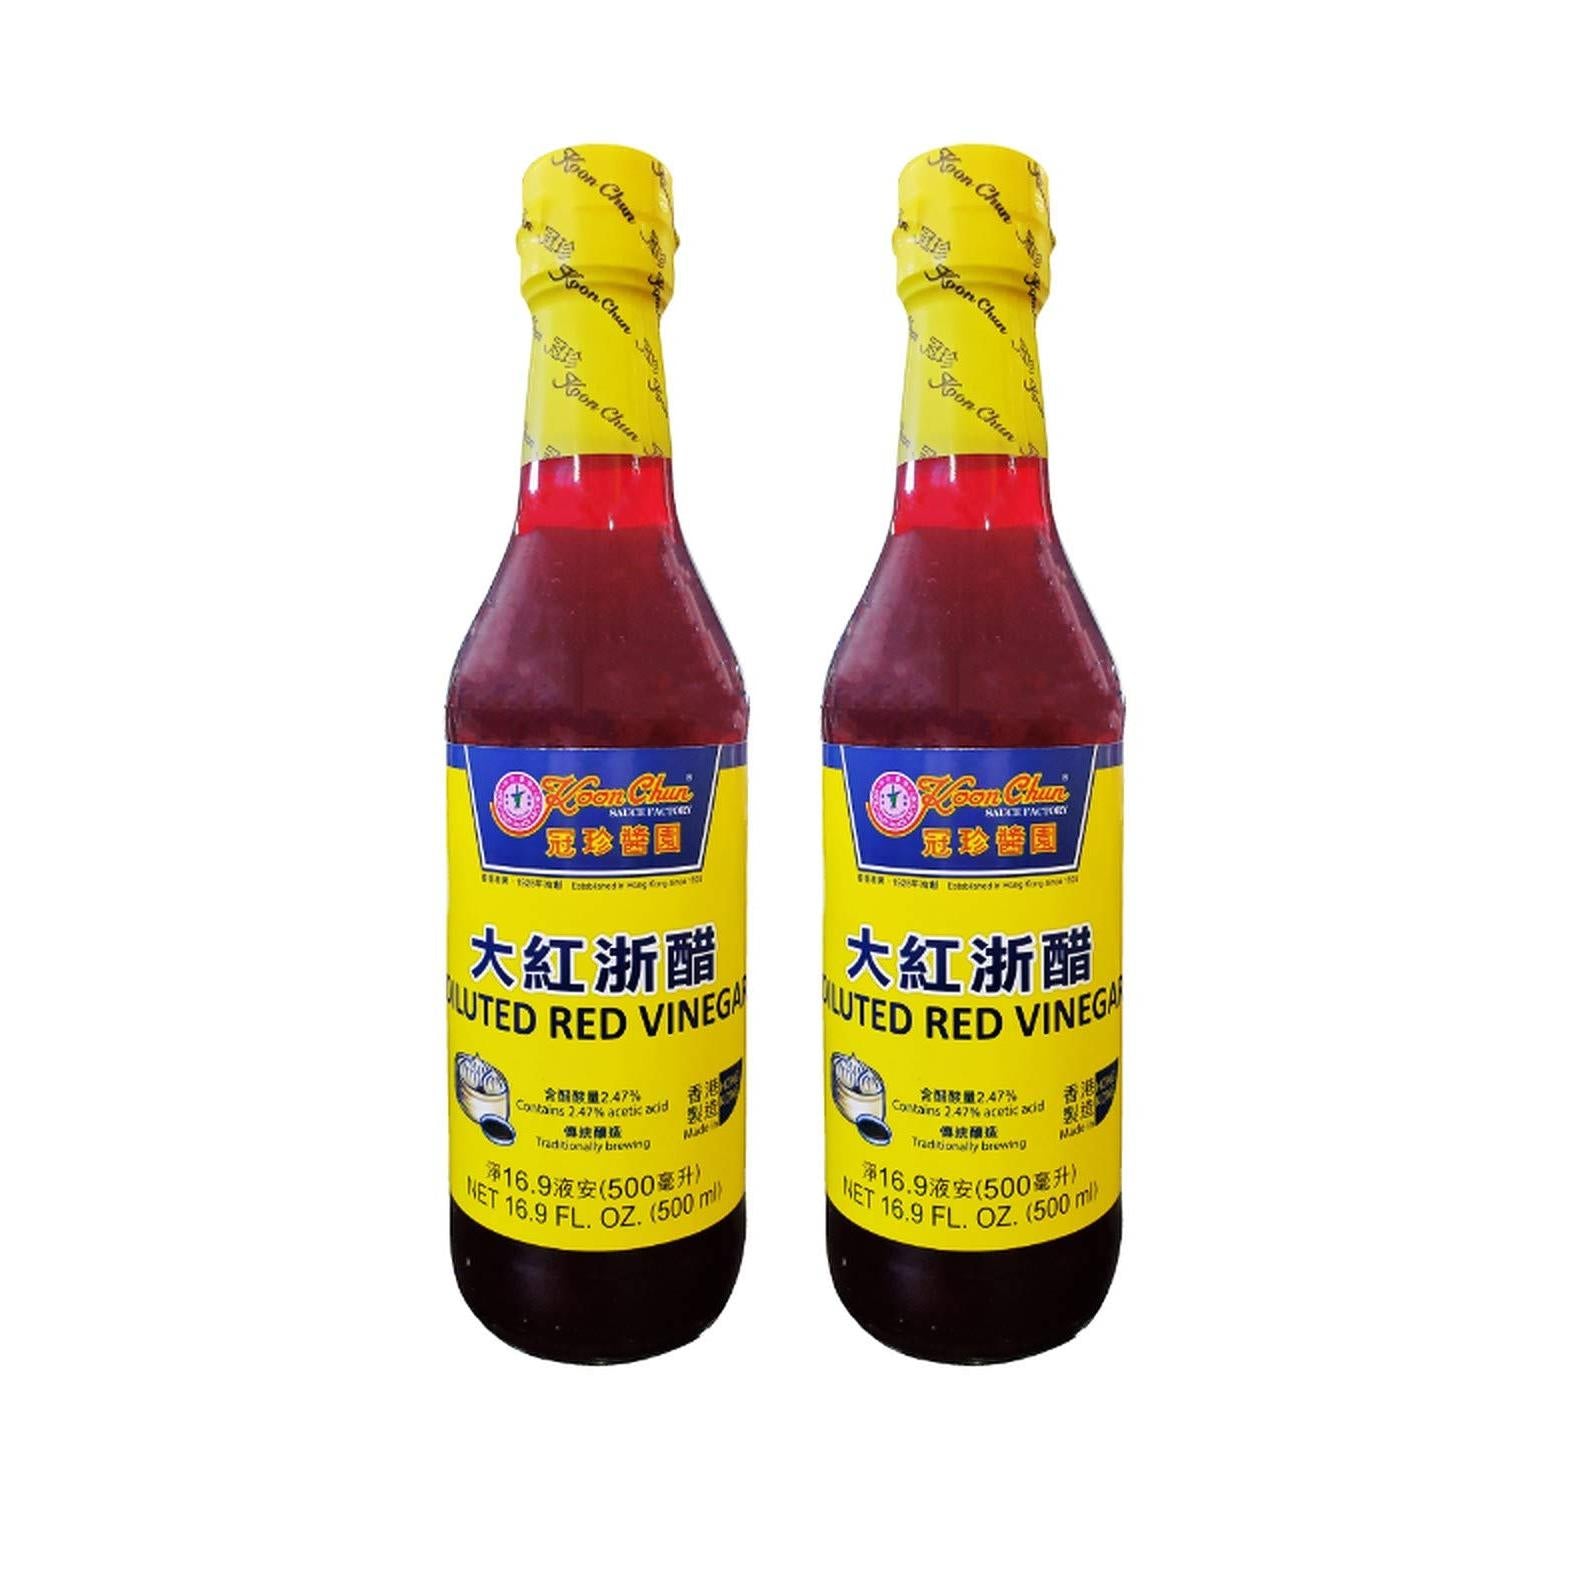 Koon Chun Diluted Red Vinegar (2 Pack, Total of 1000mL)